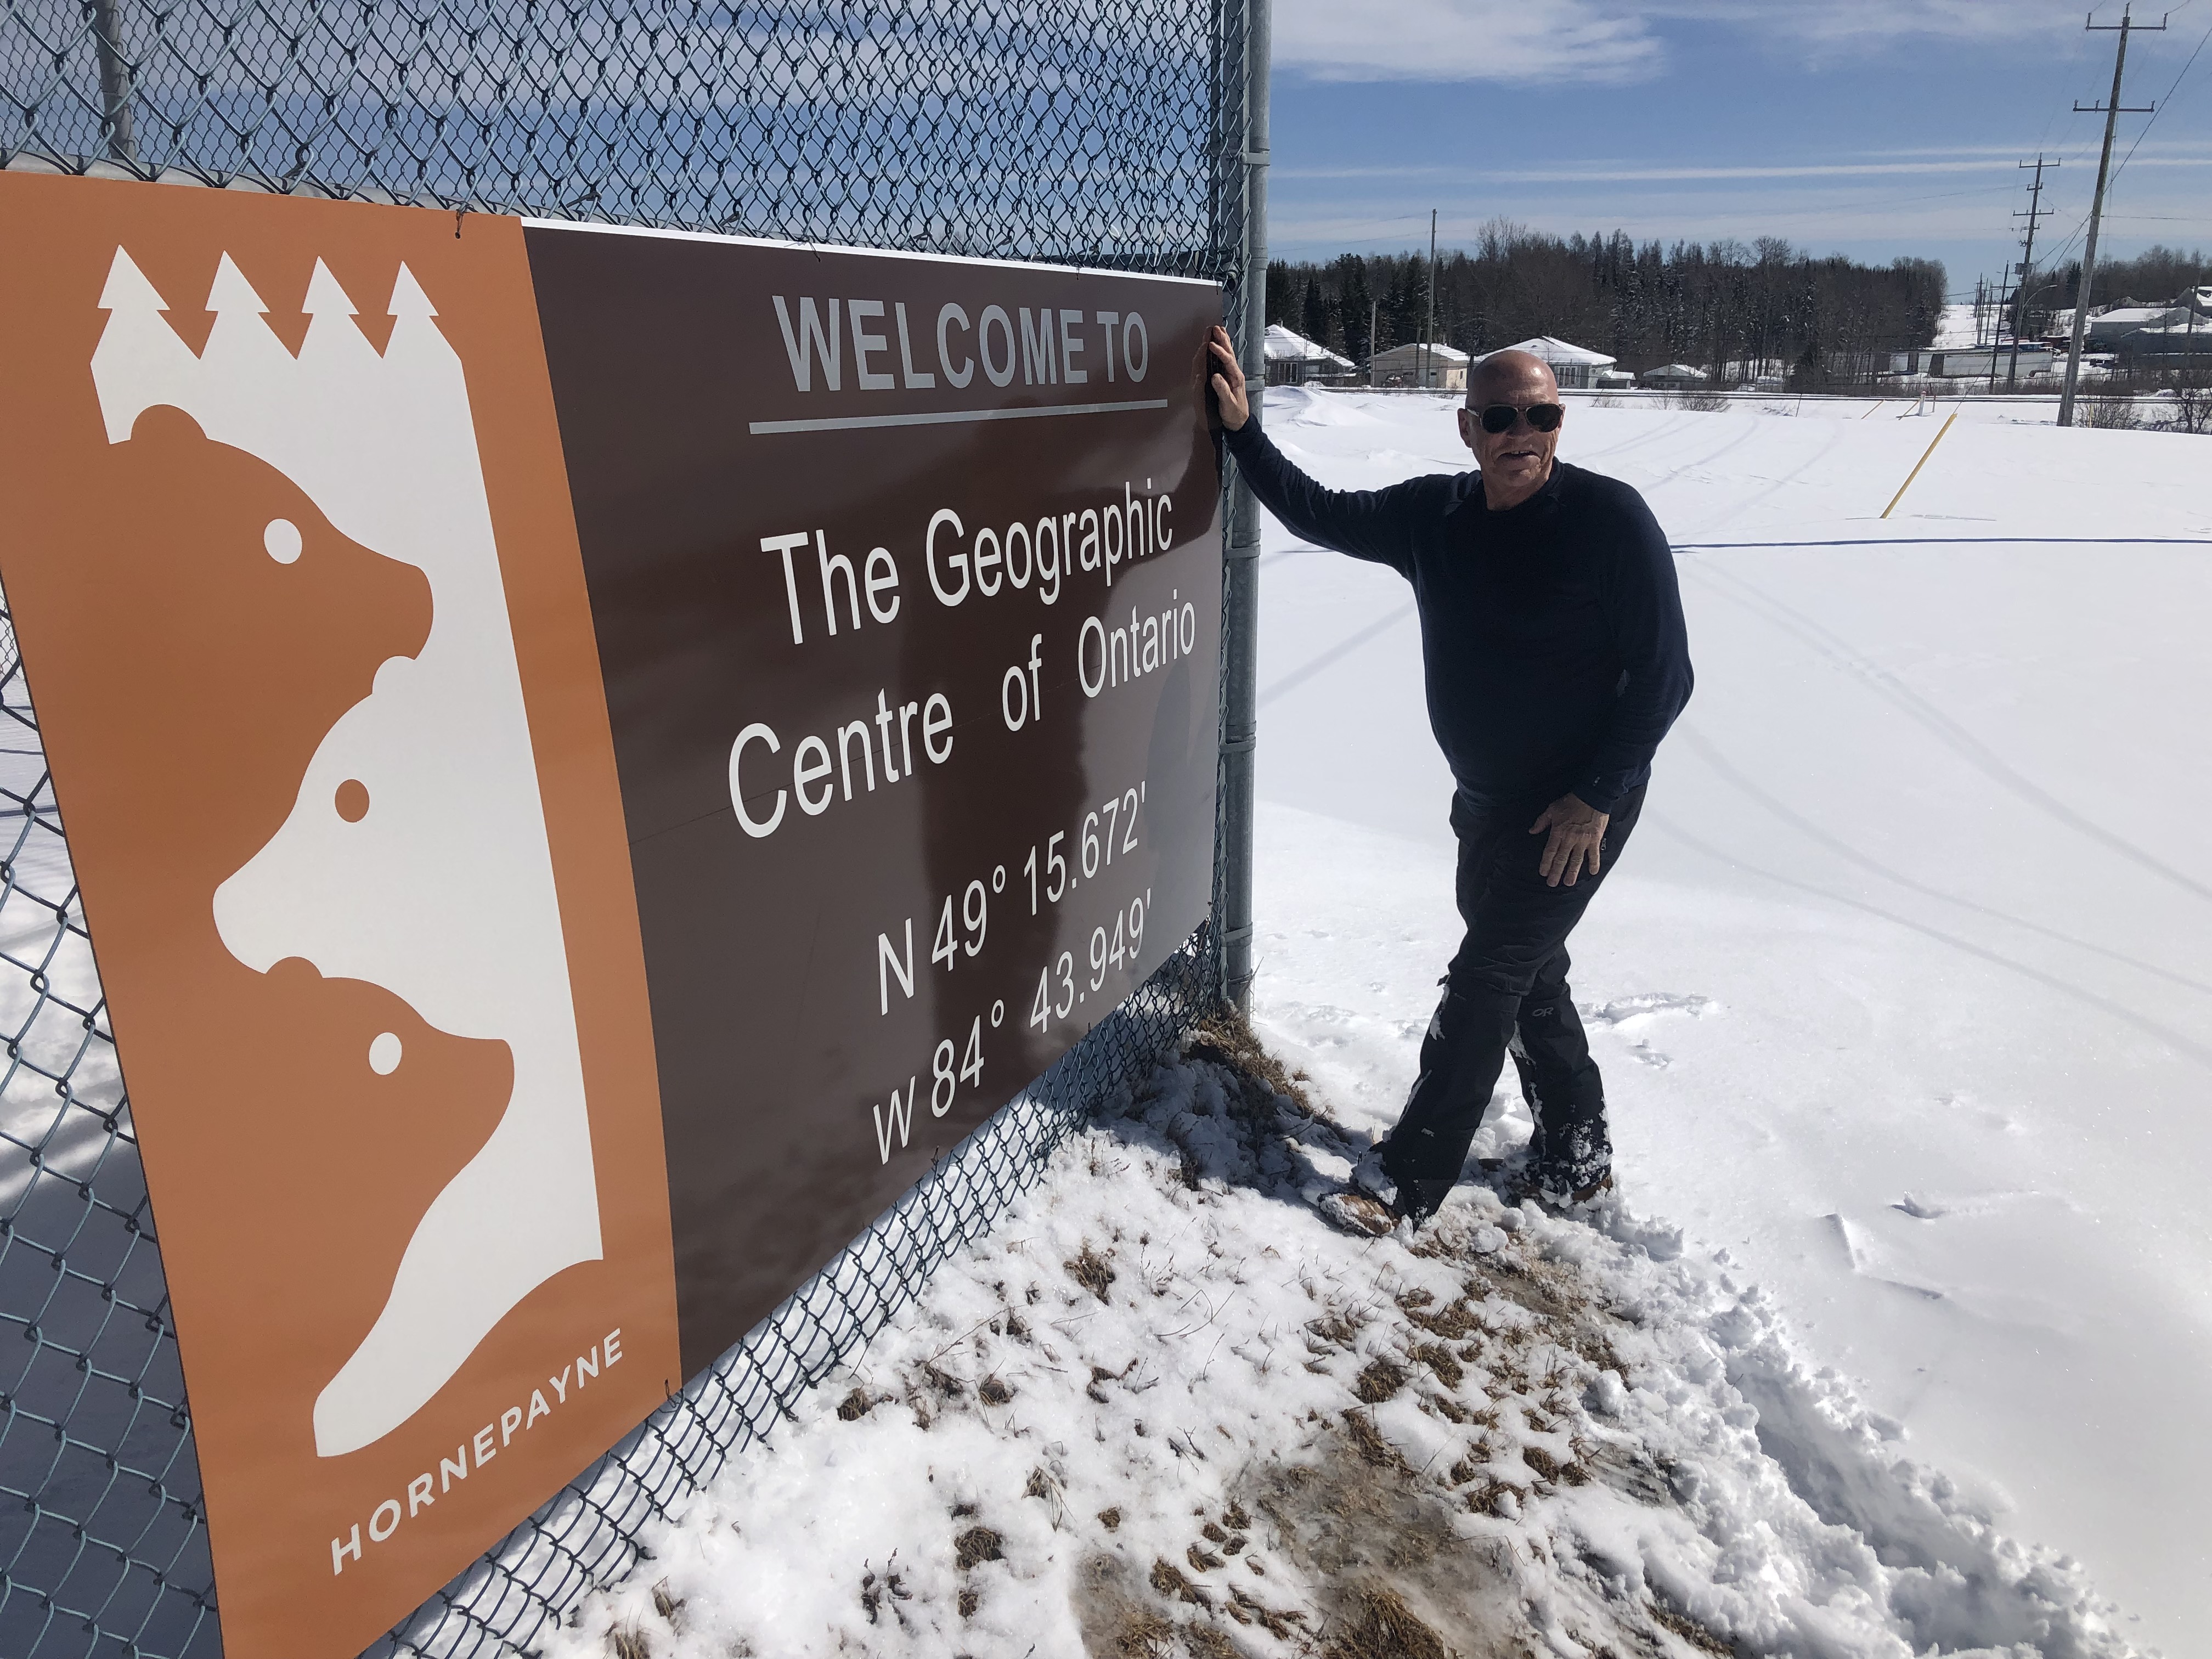 Bill Steer wearing a black jacket and pants, standing next to a large sign tnat says "Welcome to the Geographic Centre of Ontario". The ground is snowy and the sky is blue.